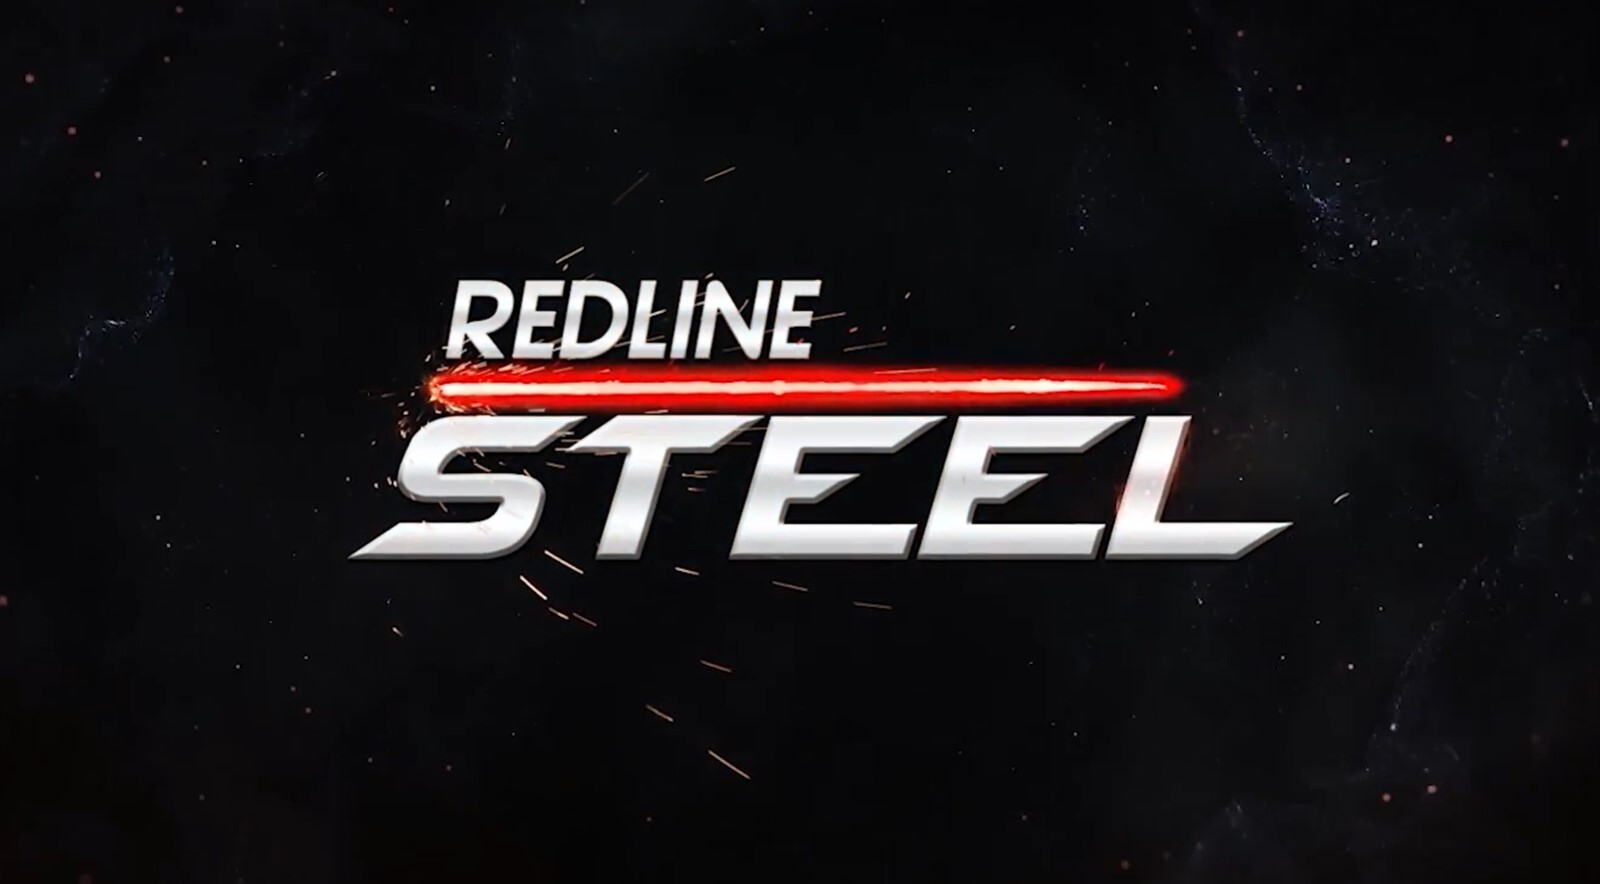 Redline Steel Review: Quality, Diversity, and Uniquely American Artwork Collection! (It's Shut Down)